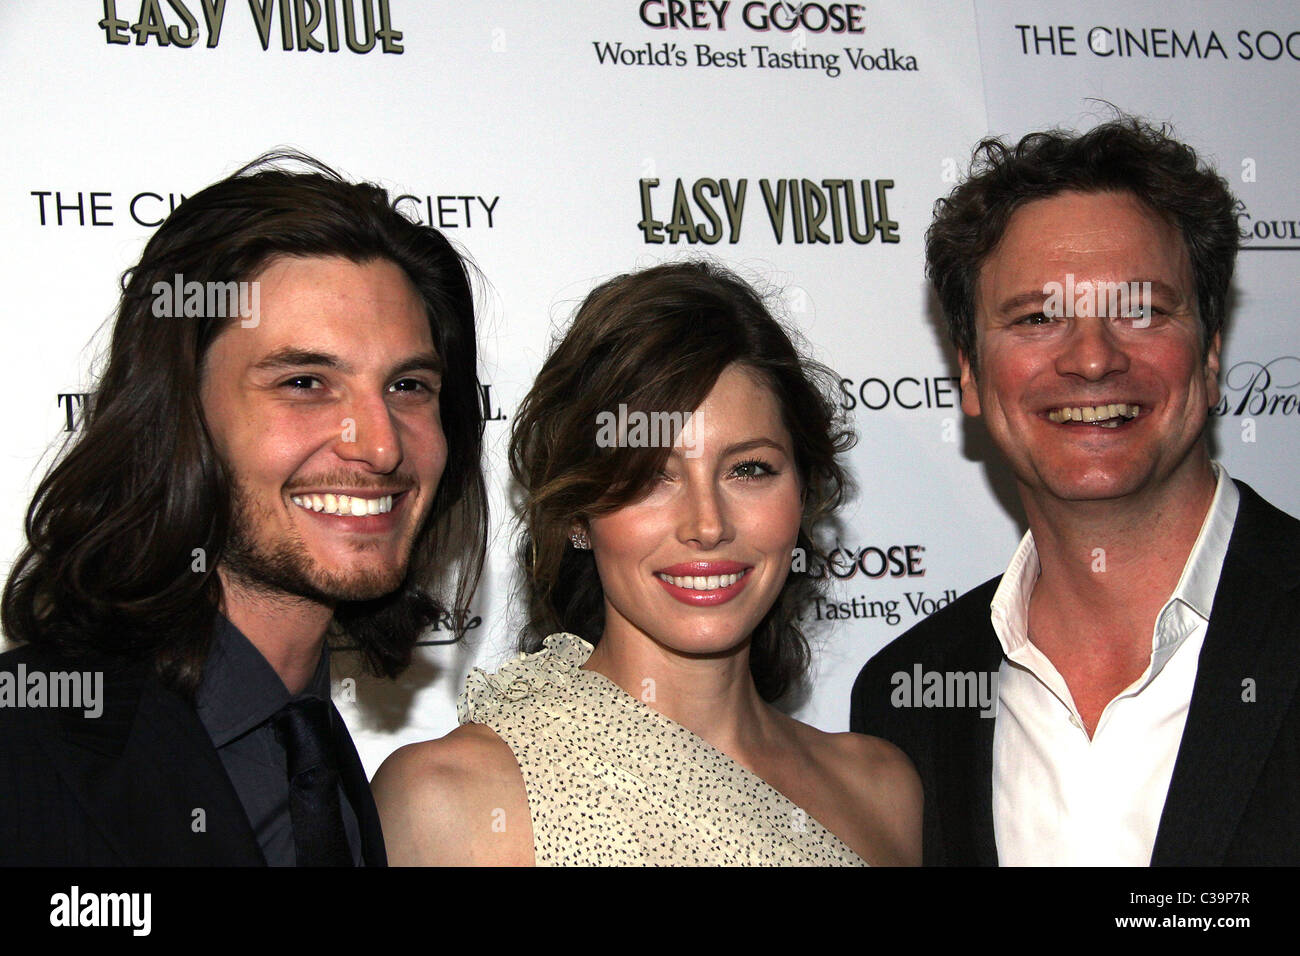 Ben Barnes, Jessica Biel, Colin Firth Screening Of 'Easy Virtue' hosted by The Cinema Society - Inside Arrivals New York City, Stock Photo